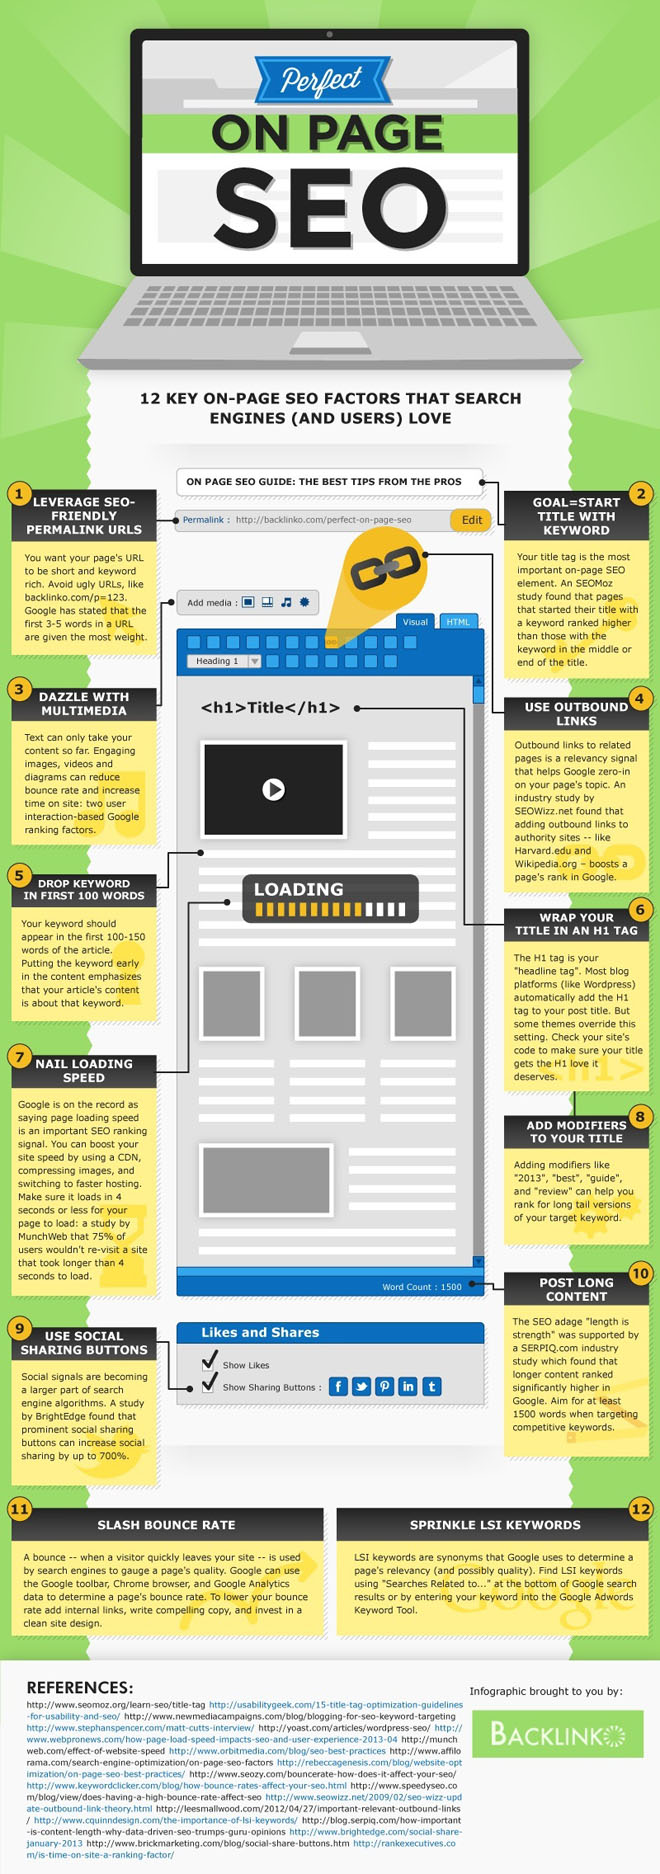 on_page_SEO_infographic_large